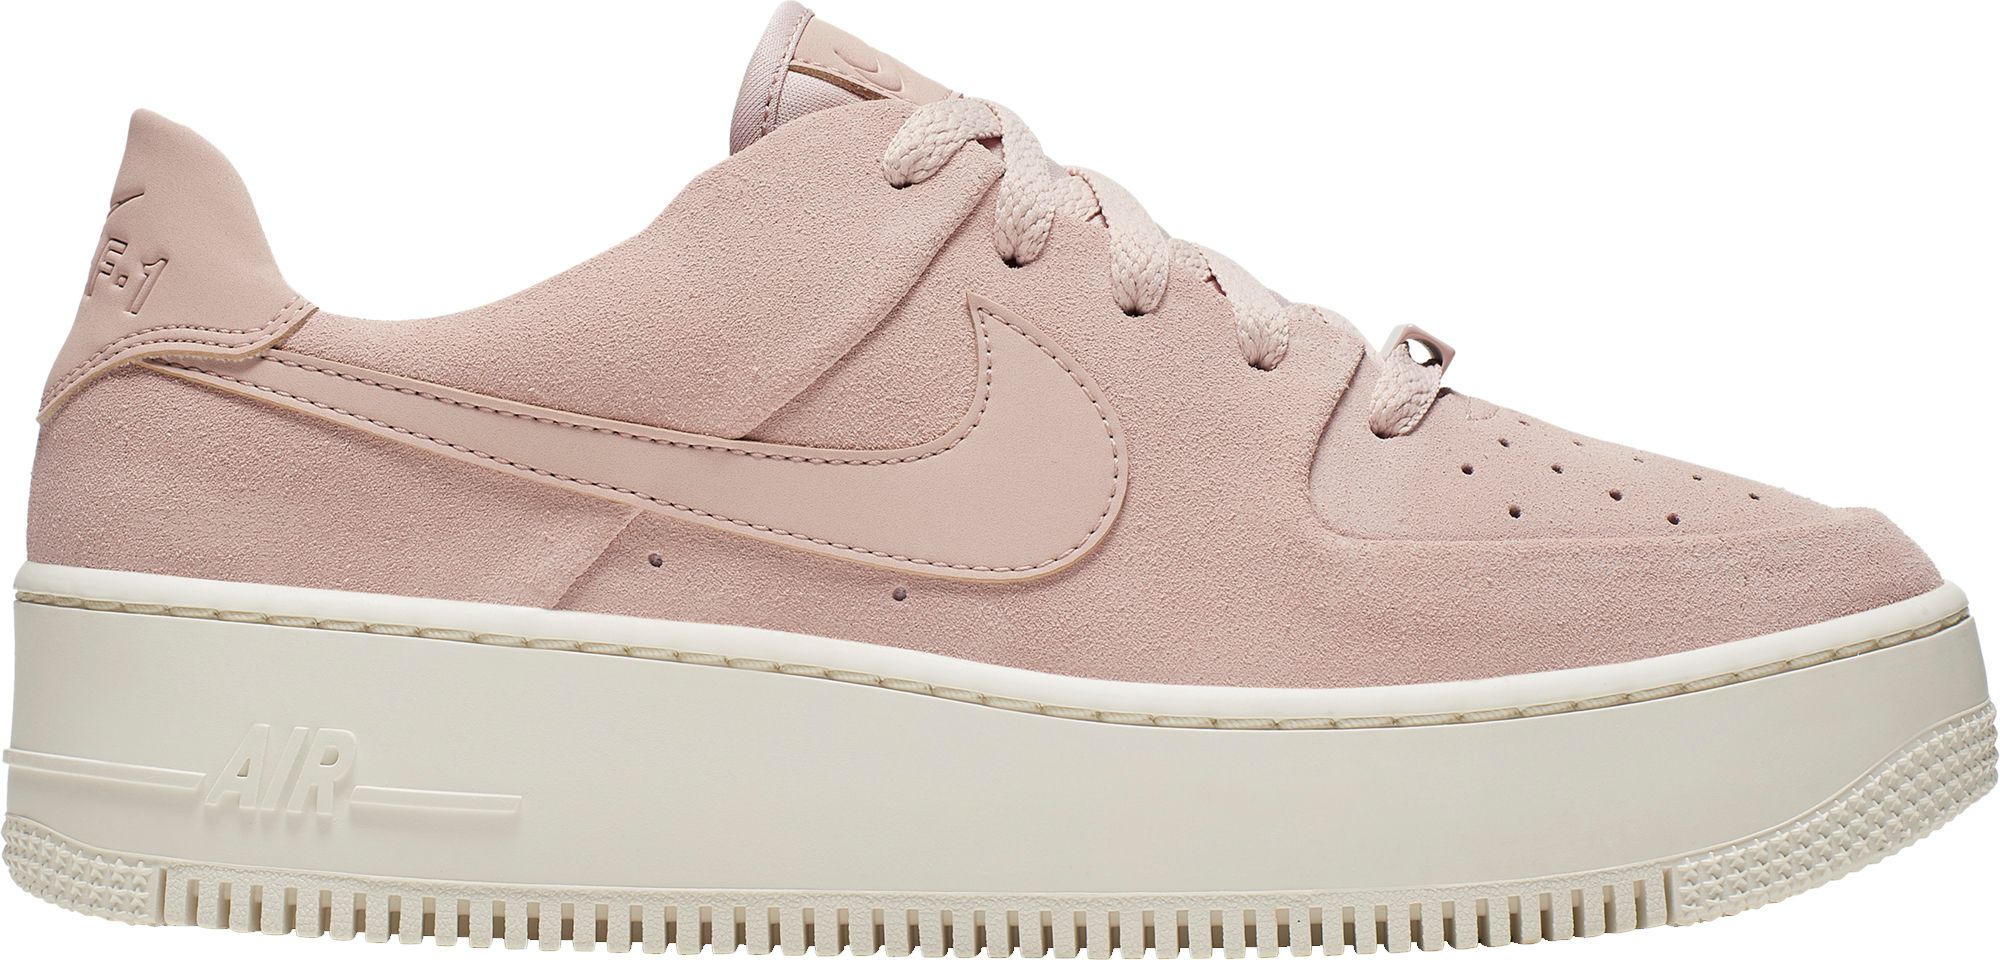 Nike Women's Air Force 1 Sage Shoes 